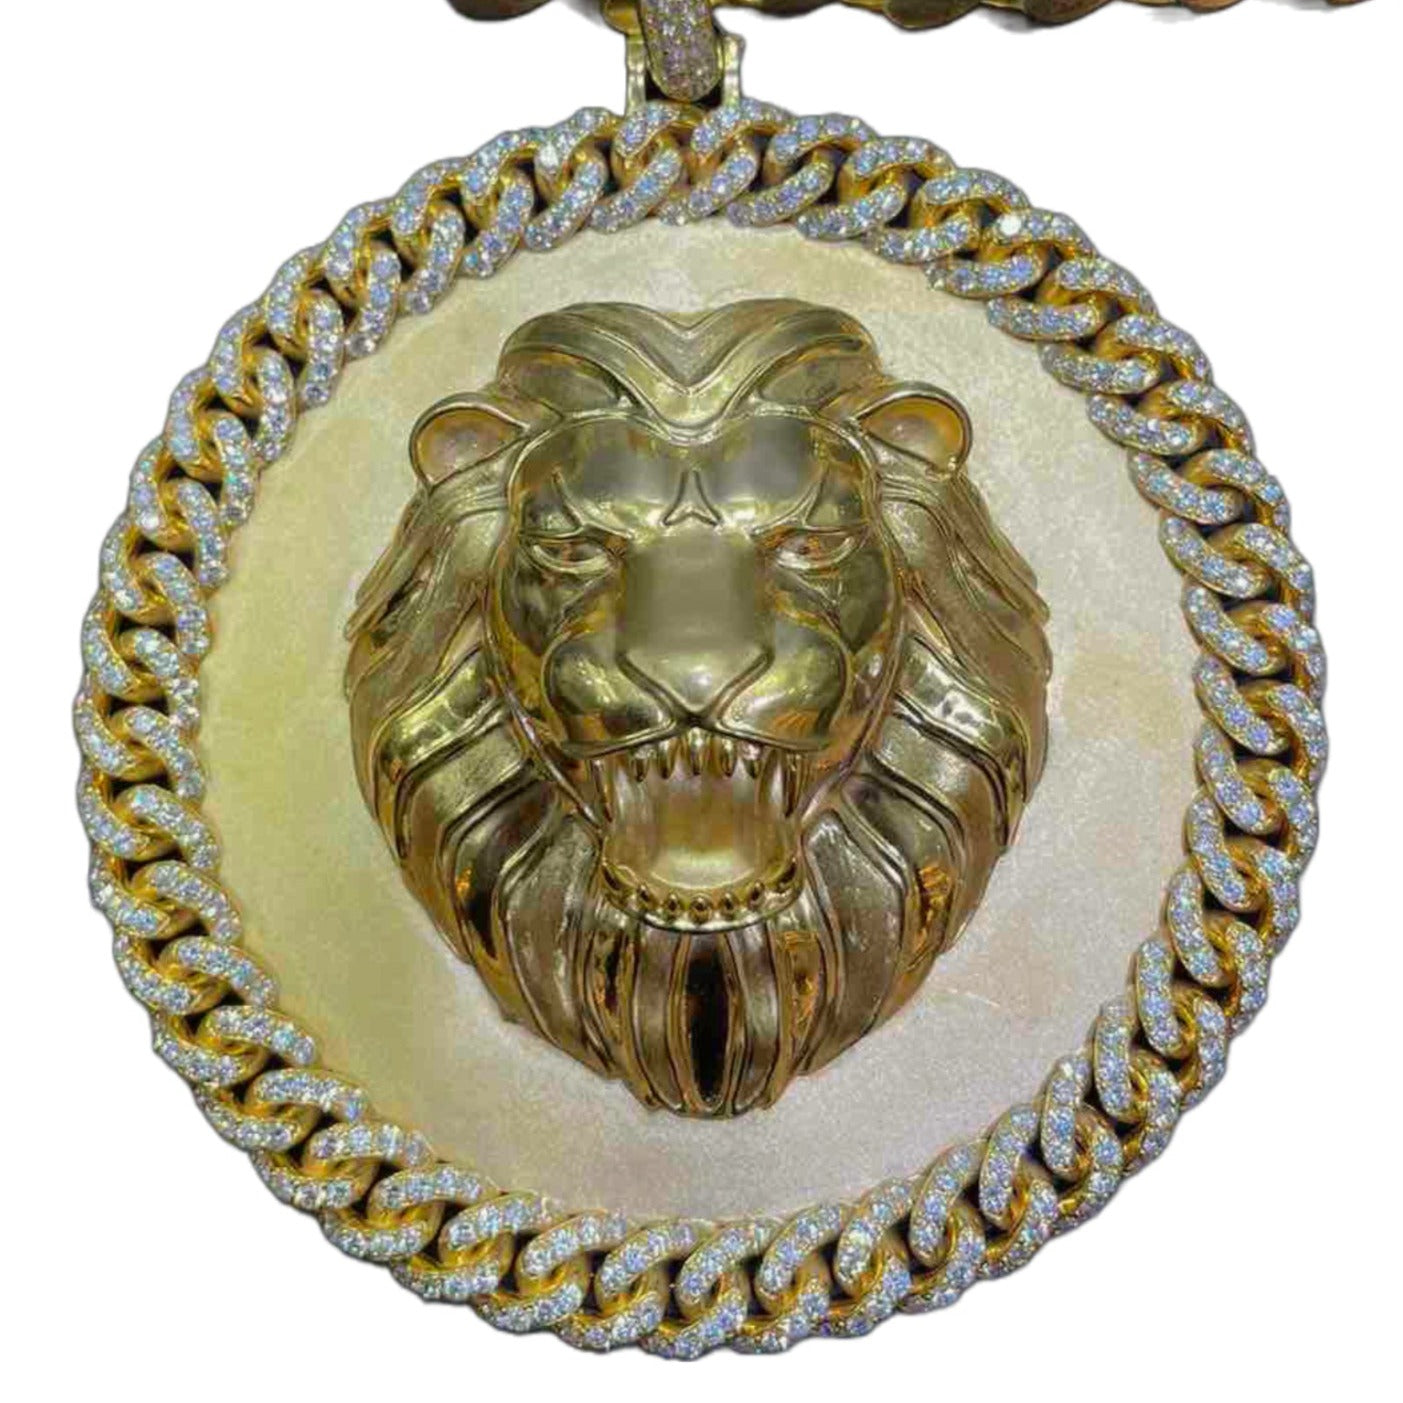 Brand New Custom Made 14k Solid Gold "Iced Out" Tiger Charm Pendant with vvs1 natural diamonds